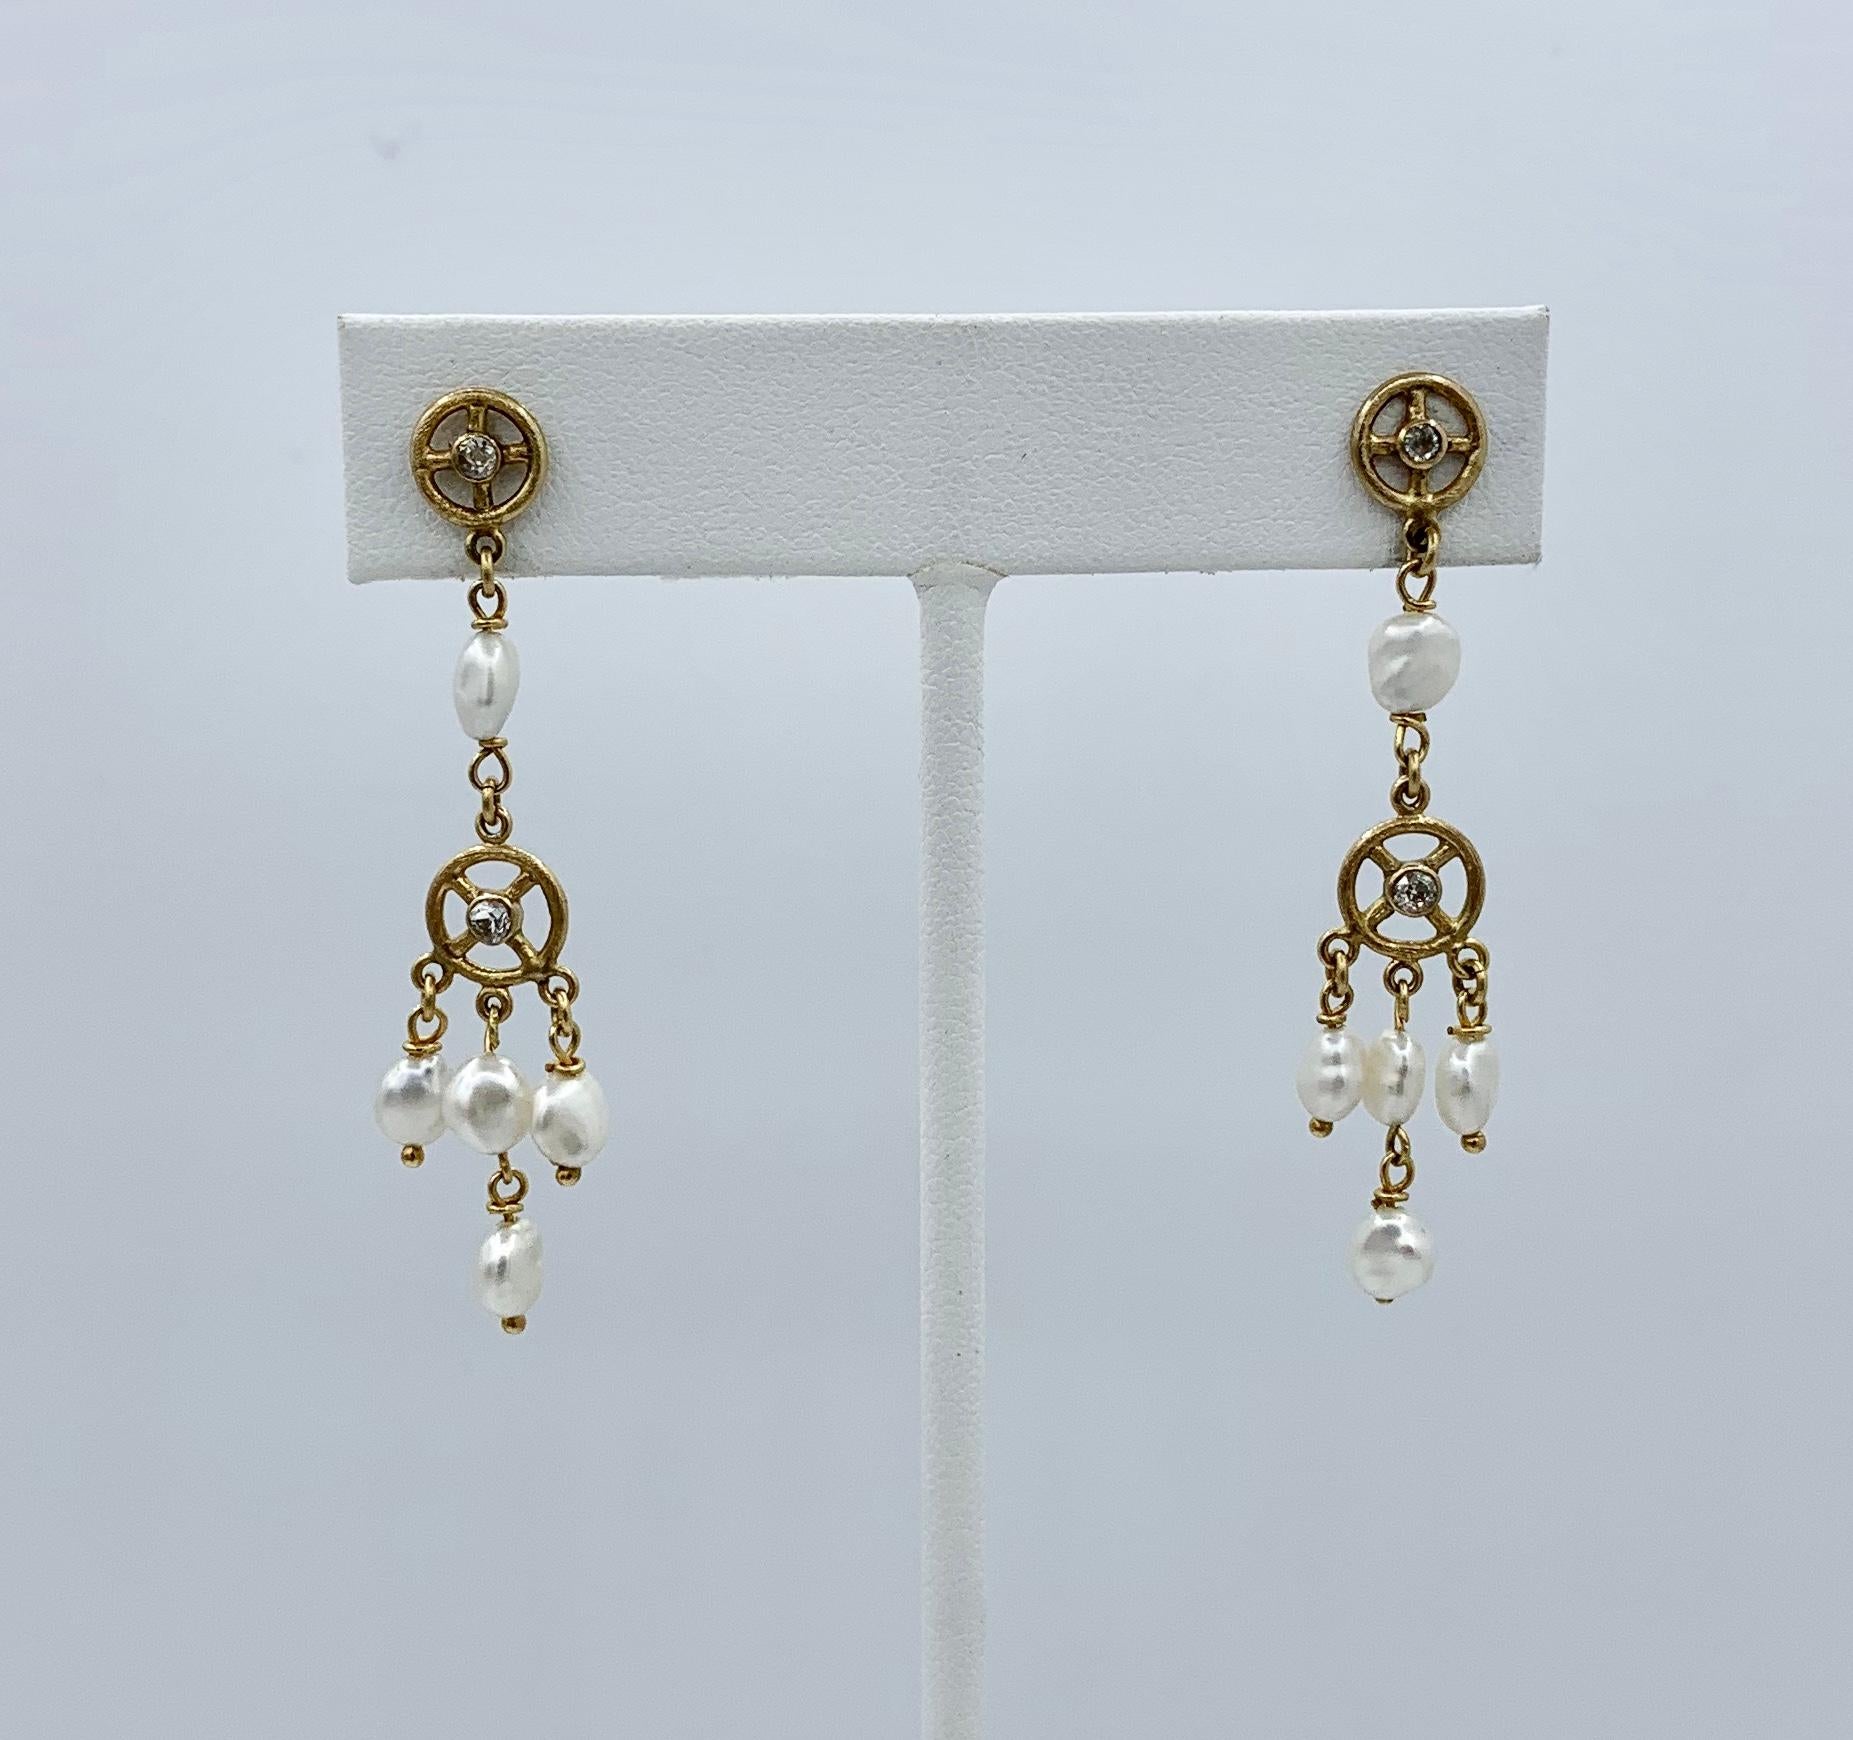 This is a delightful pair of Dangle Drop Earrings Old Mine Diamonds and Pearls set in 14 Karat Yellow Gold.  The festive jewels are perfect for everyday or the most glamorous affair.  I love that these earrings have Old Mine Cut Diamonds. 
The